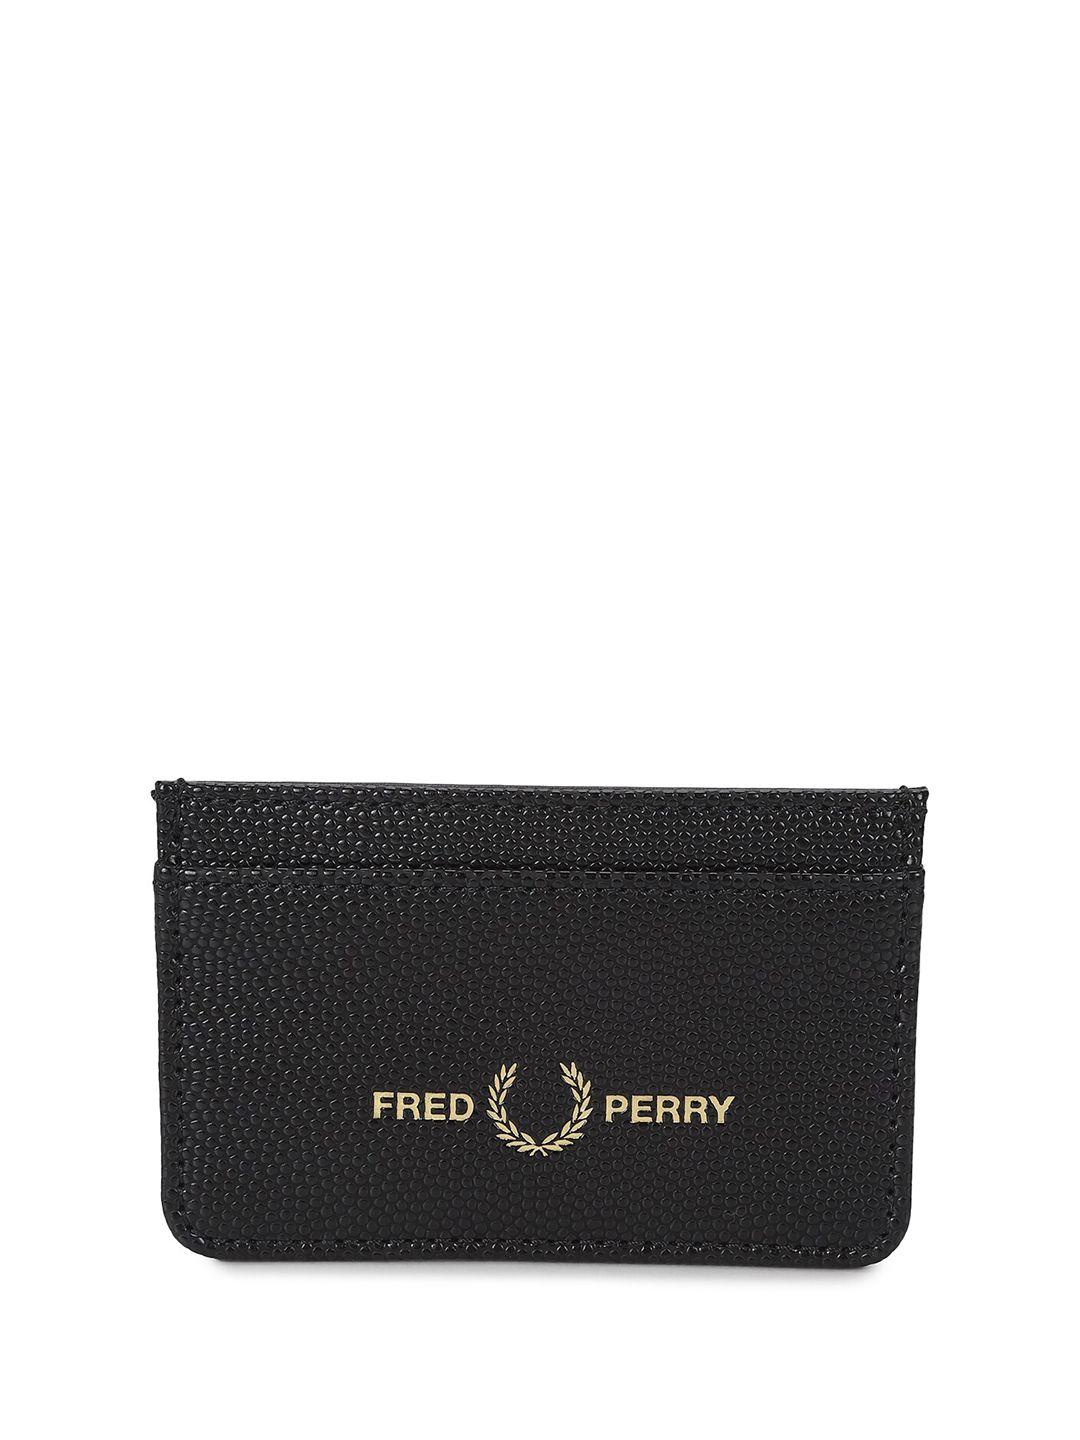 fred perry men textured card holder